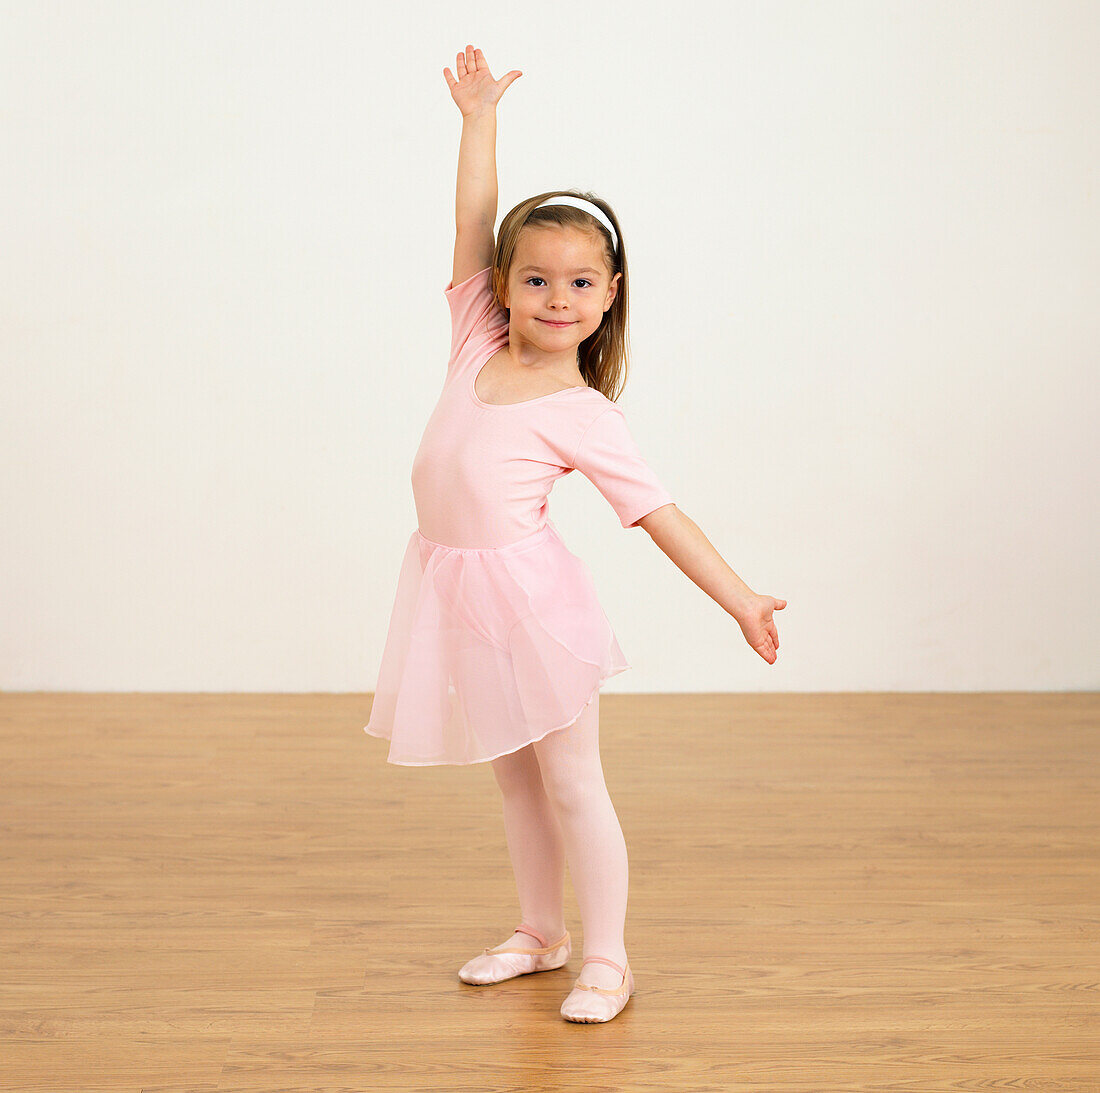 Girl in ballerina outfit holding one arm up